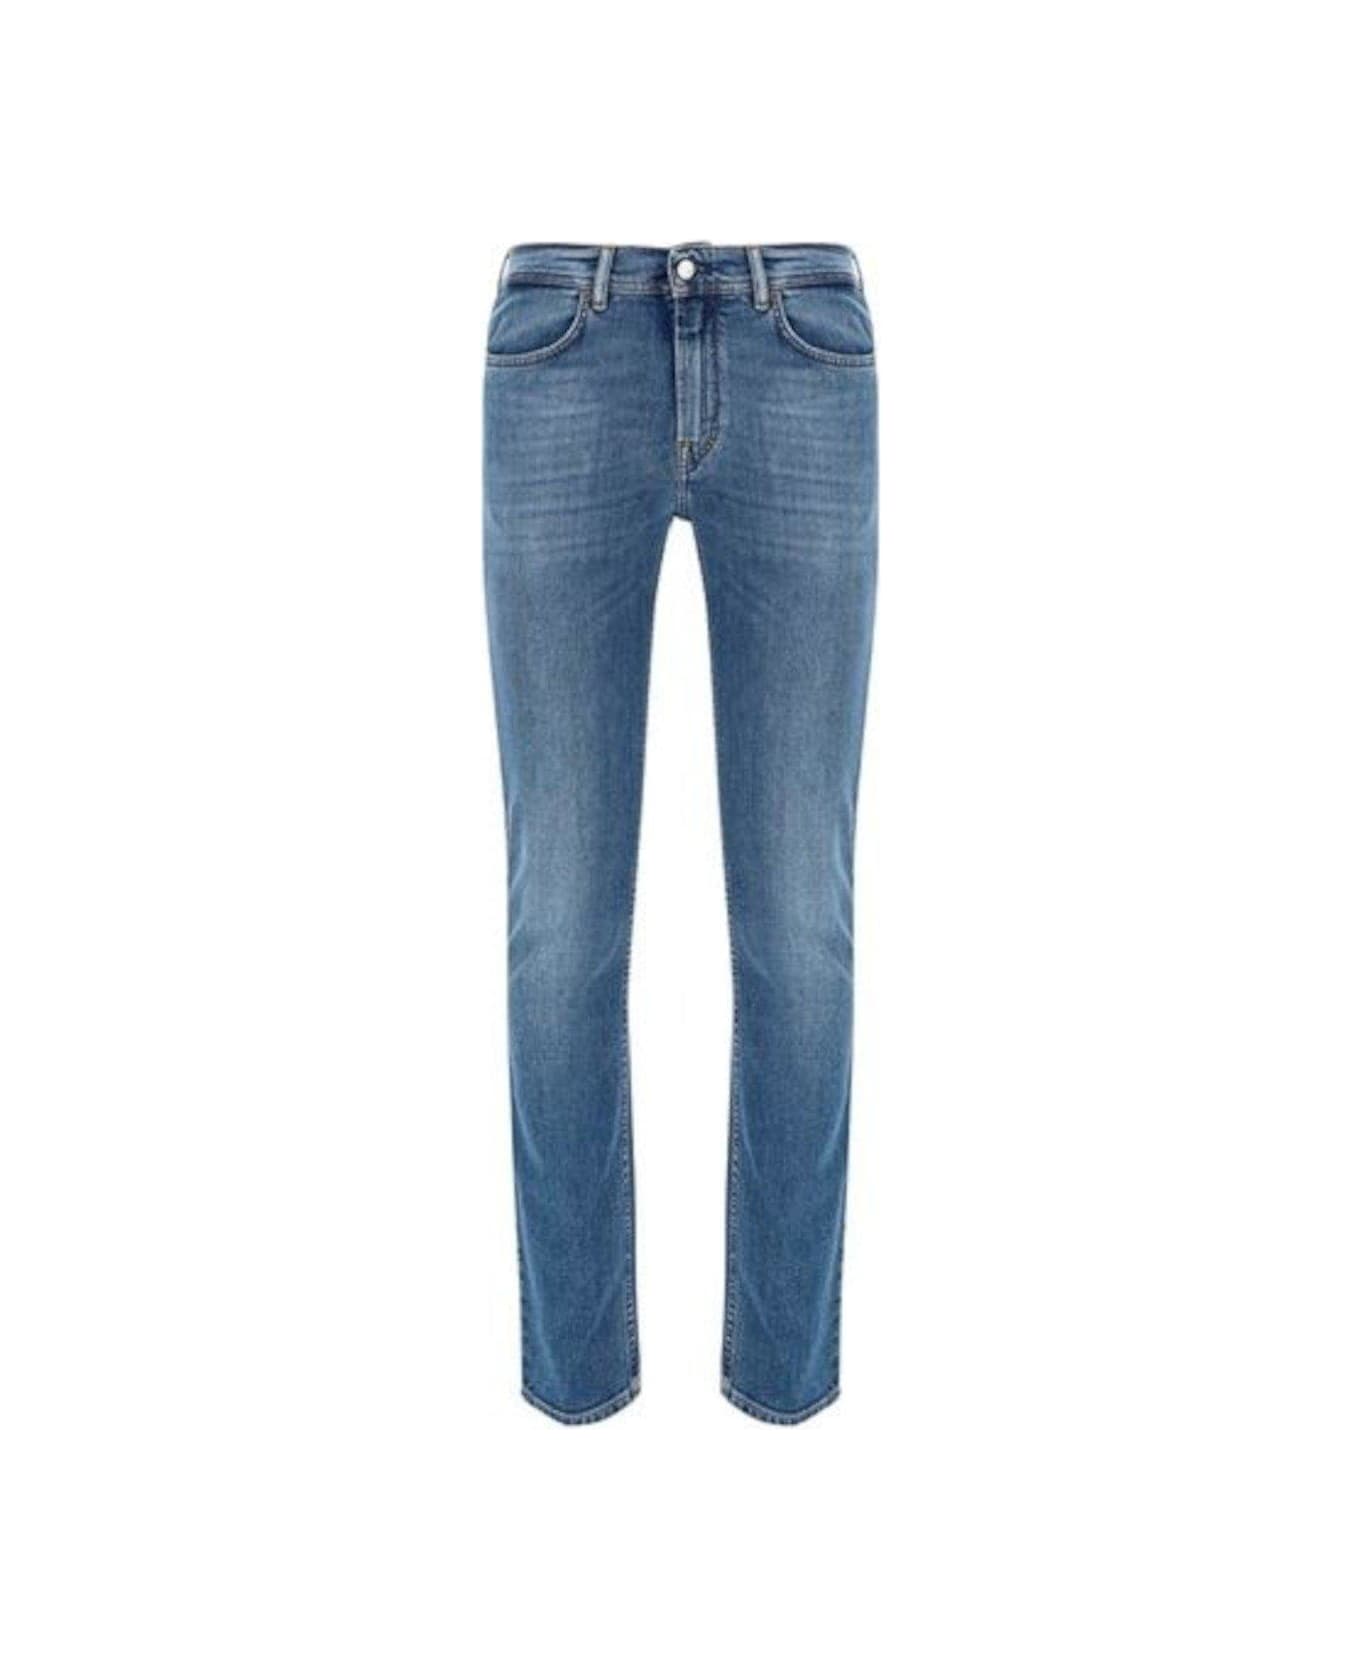 Acne Studios North Mid-rise Jeans - Blue